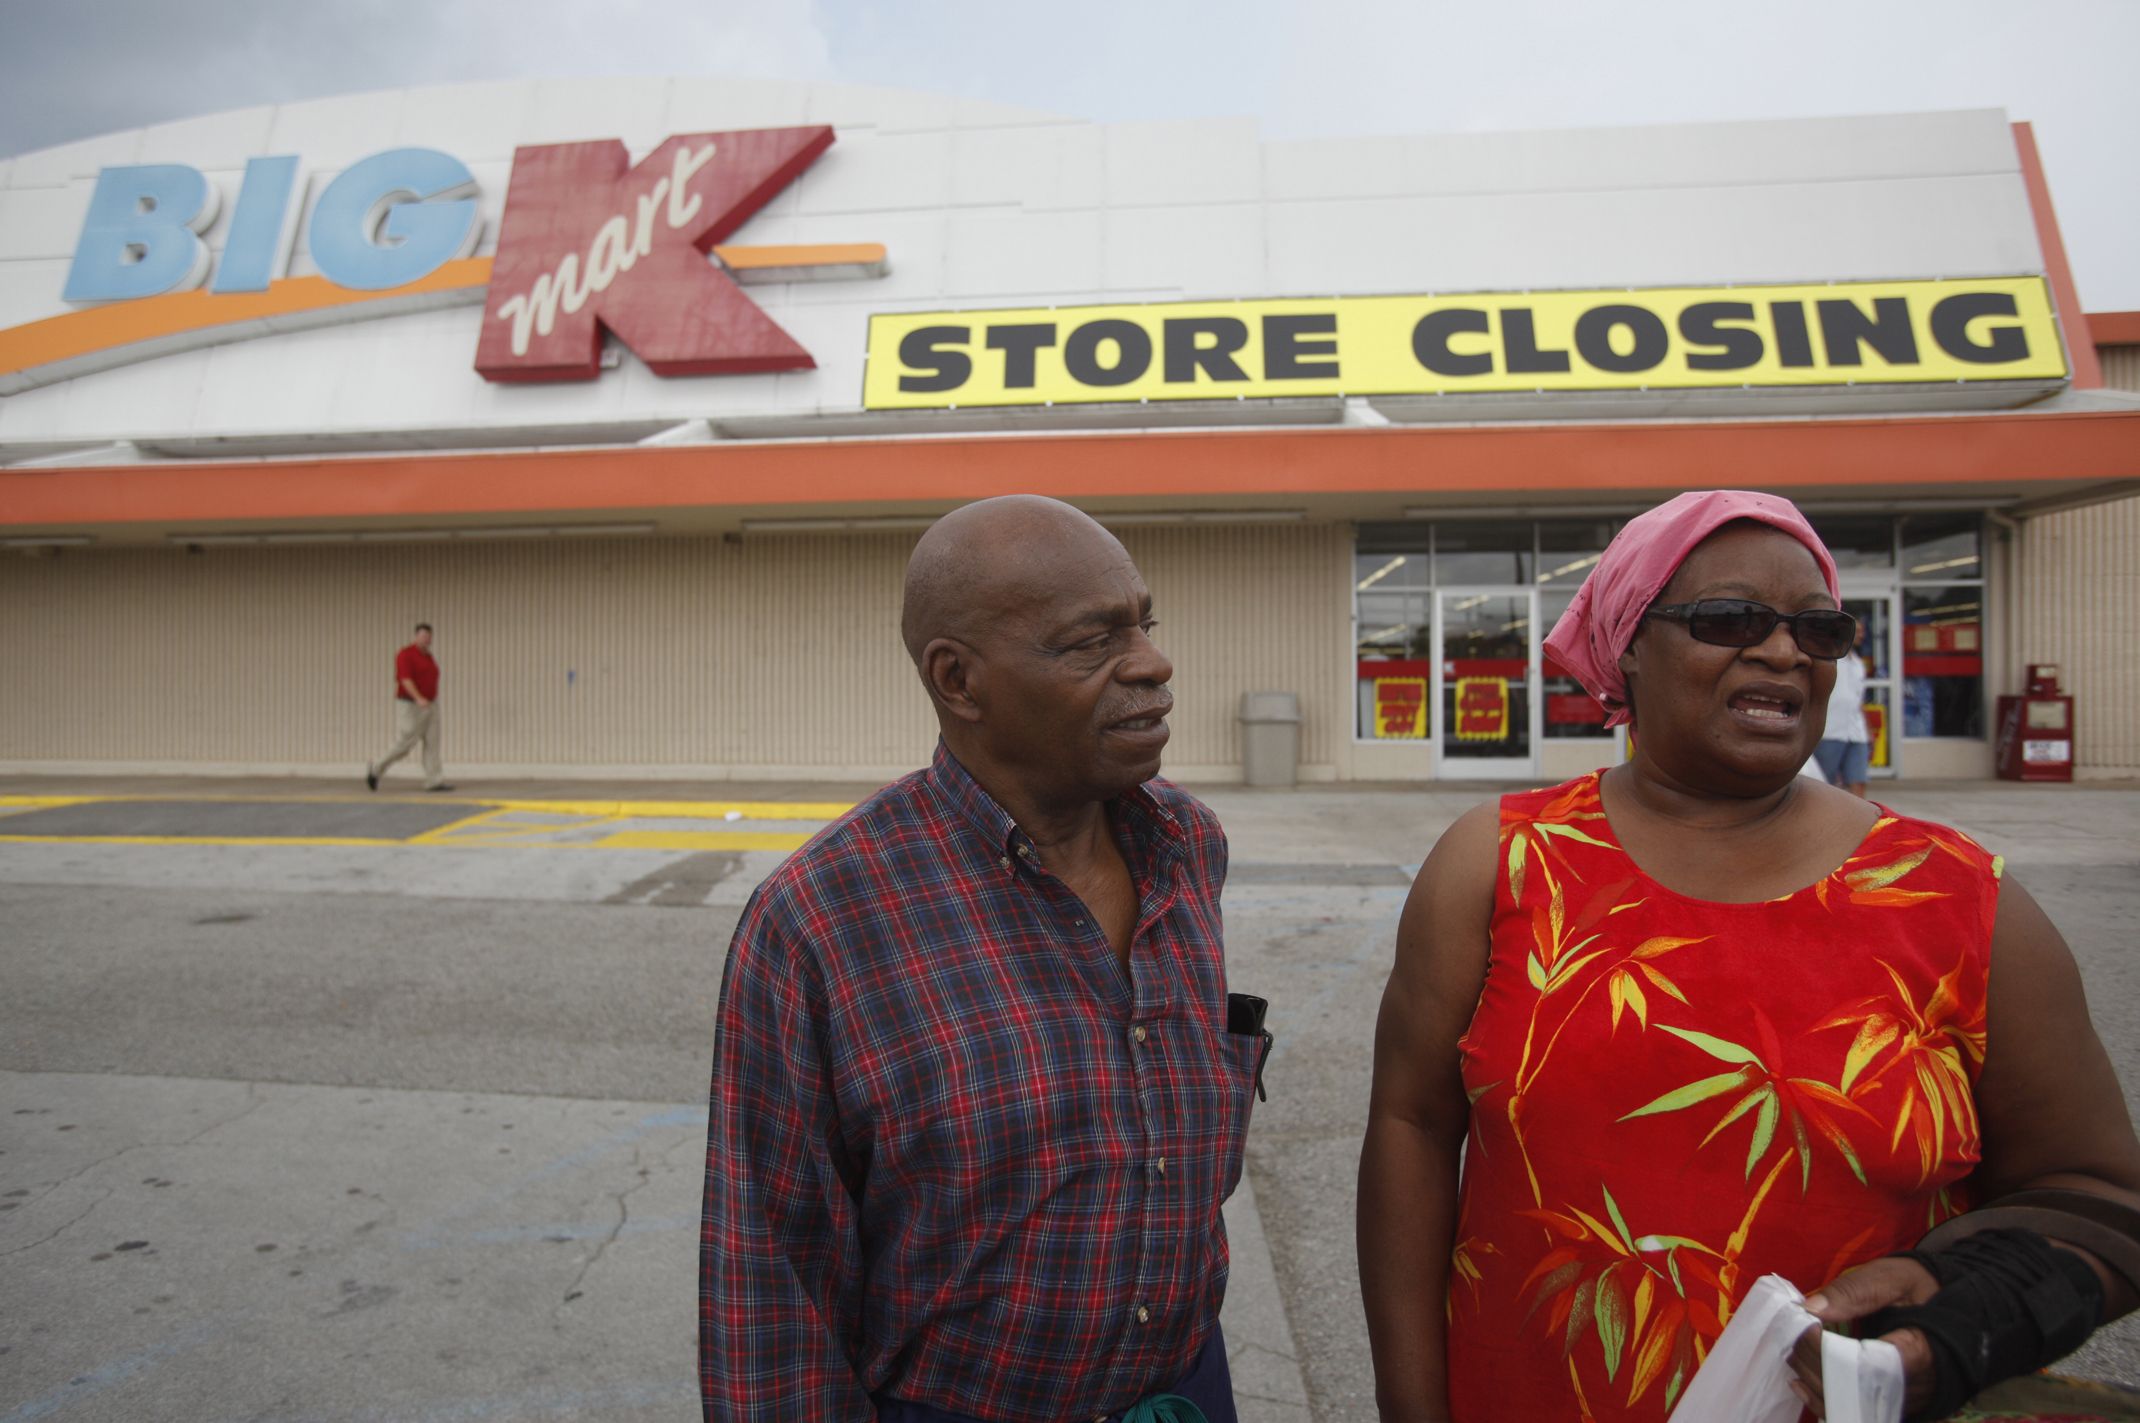 – After Years of Rumors Kmart Finally Axes Clarion  Store